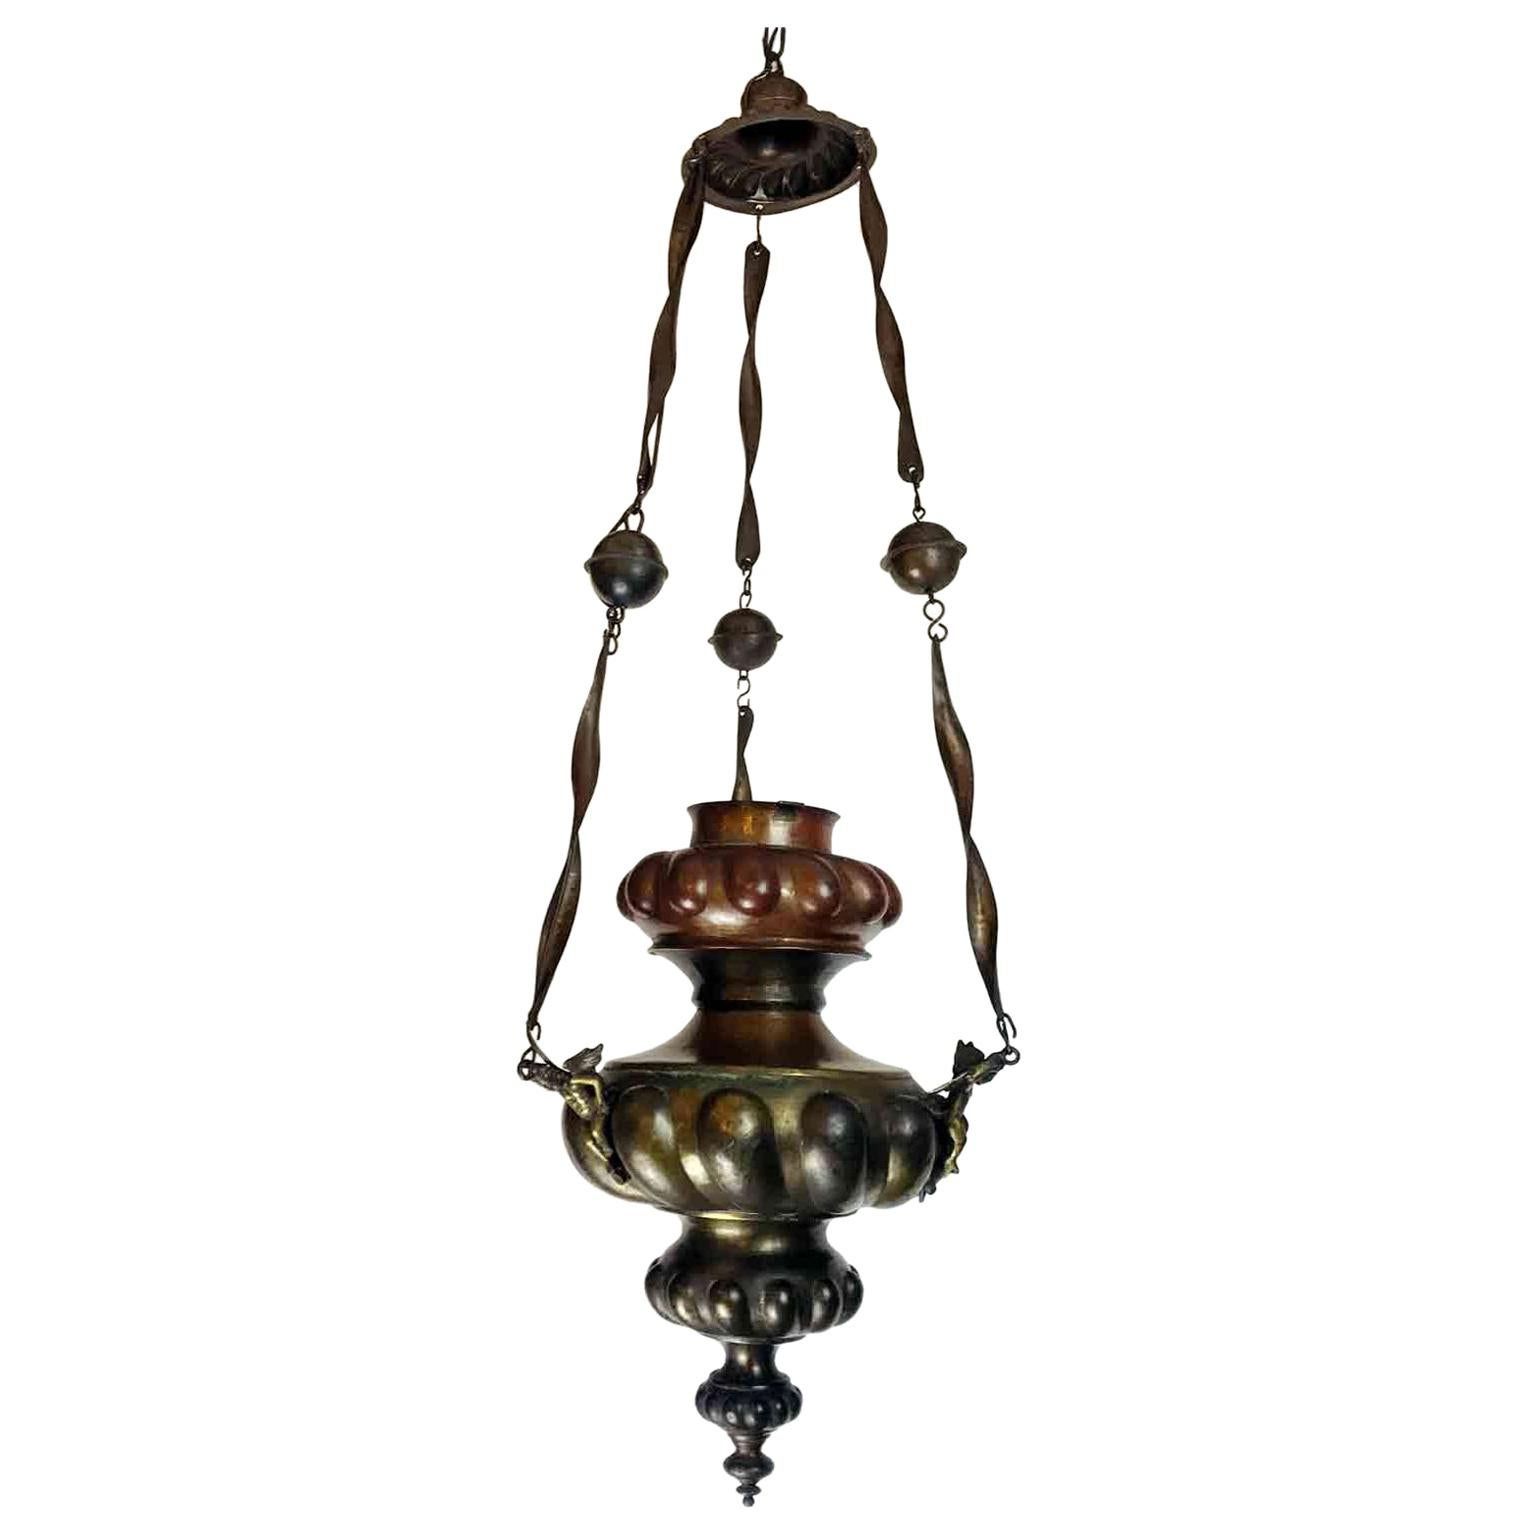 Italian 19th Century One Light Copper And Brass Lantern For Sale At 1stdibs With Regard To Favorite Gild One Light Lantern Chandeliers (View 14 of 15)